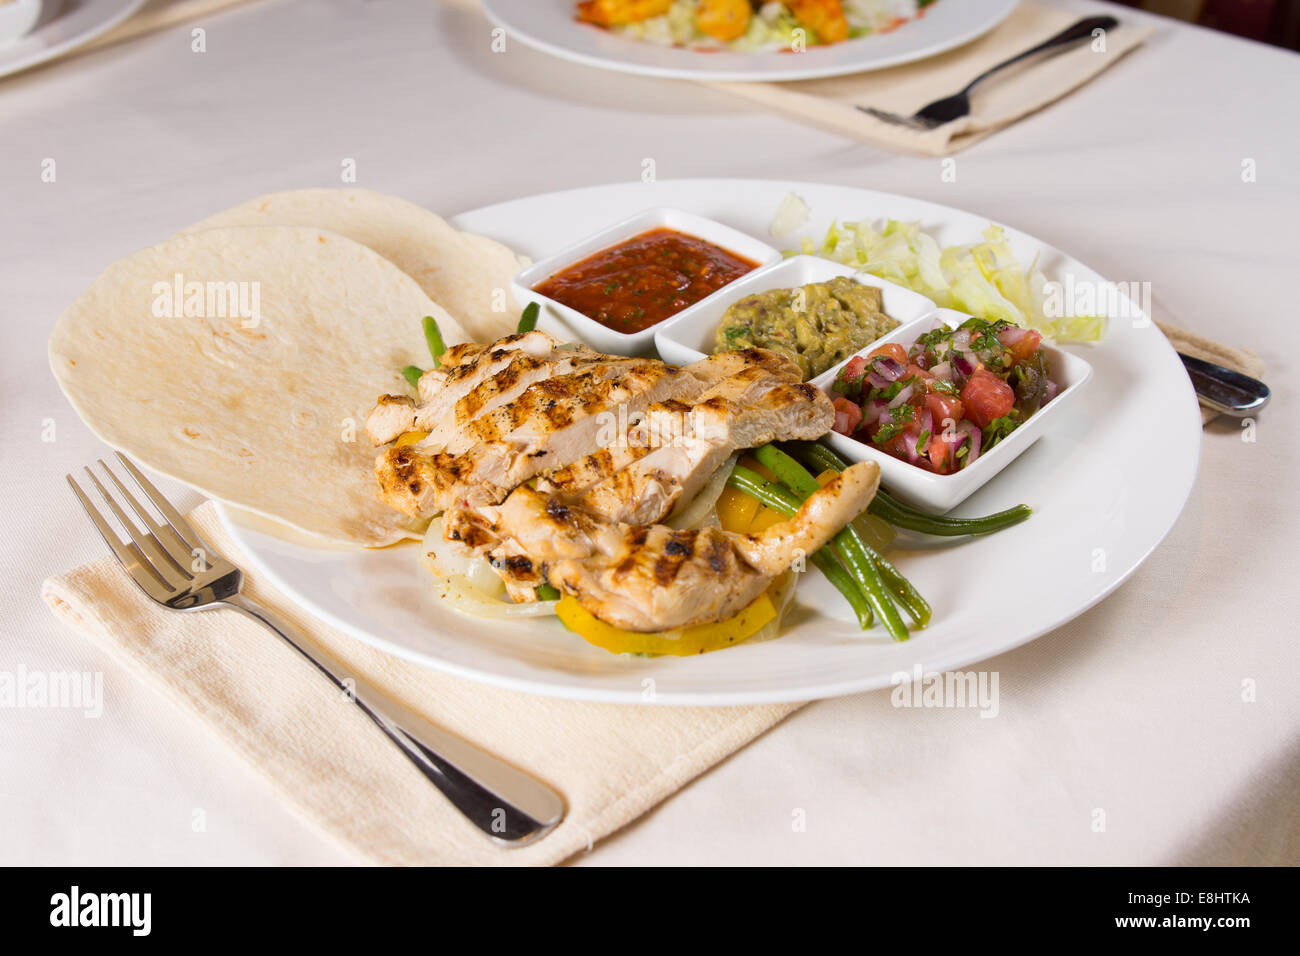 Grilled Chicken Fajitas on Plate at Place Setting in Restaurant Stock Photo  - Alamy